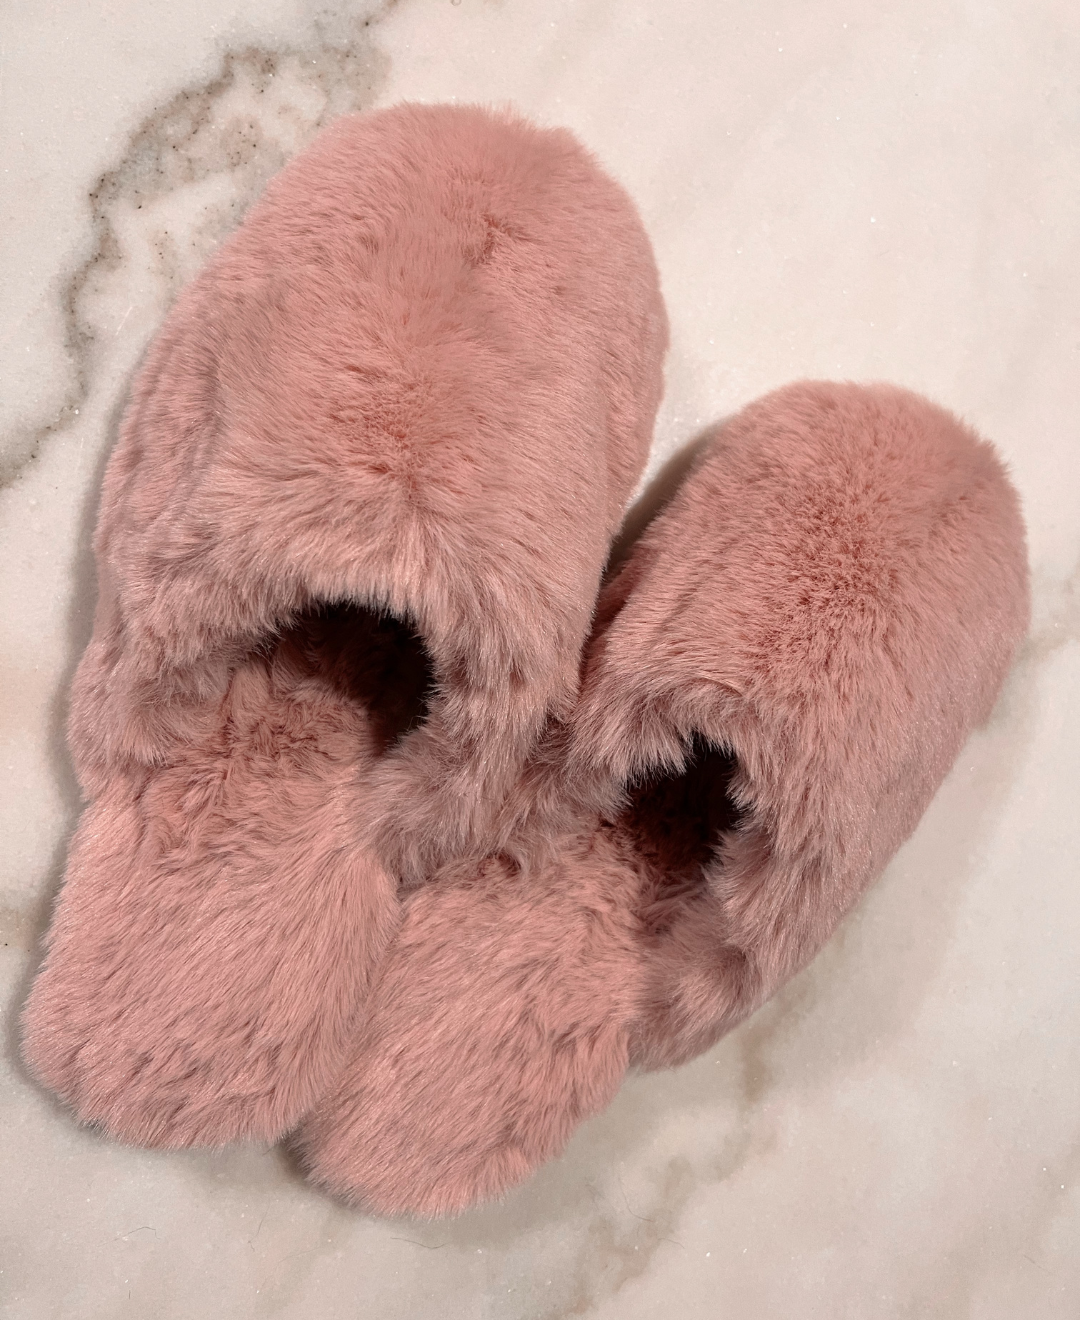 FAUX FUR SLIPPERS - Pink